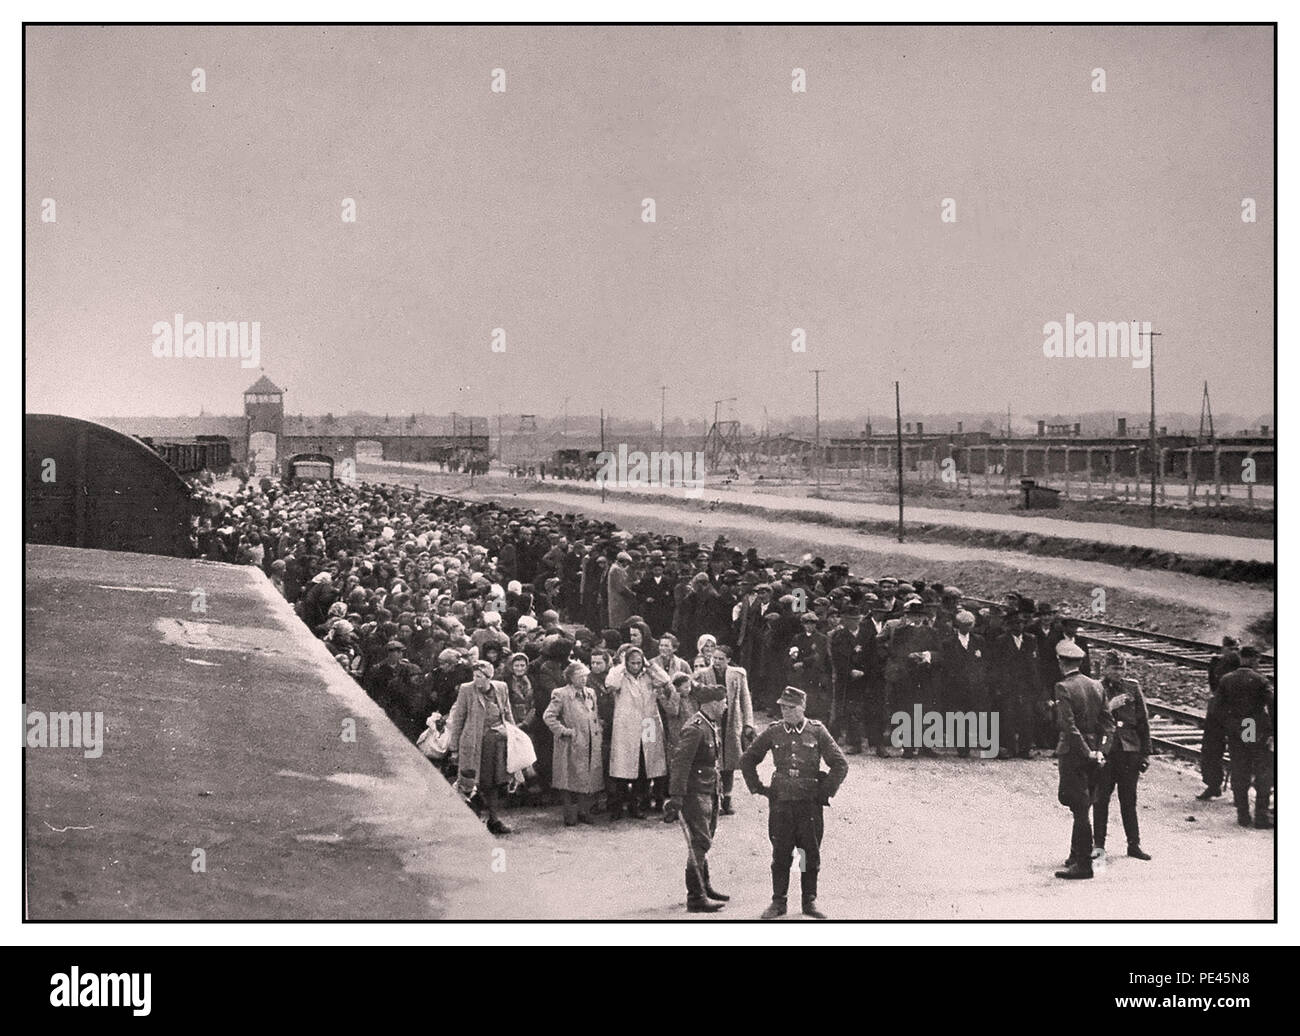 AUSCHWITZ-BIRKENAU HOLOCAUST PRISONERS ARRIVAL- A vision of hell on earth. 1944.  Nazis Troops in military uniform wearing jackboots  'grading' (life or death) unsuspecting male and female prisoners on rail concourse outside entrance to Auschwitz-Birkenau extermination death camp. The infamous Auschwitz camp was started by order of Adolf Hitler in 1940's during the occupation of Poland by Nazi Germany during World War 2. It was enthusiastically enabled by Heinrich Luitpold Himmler the Reichsführer of the Schutzstaffel, and leading member of the Nazi Party of Germany. Stock Photo